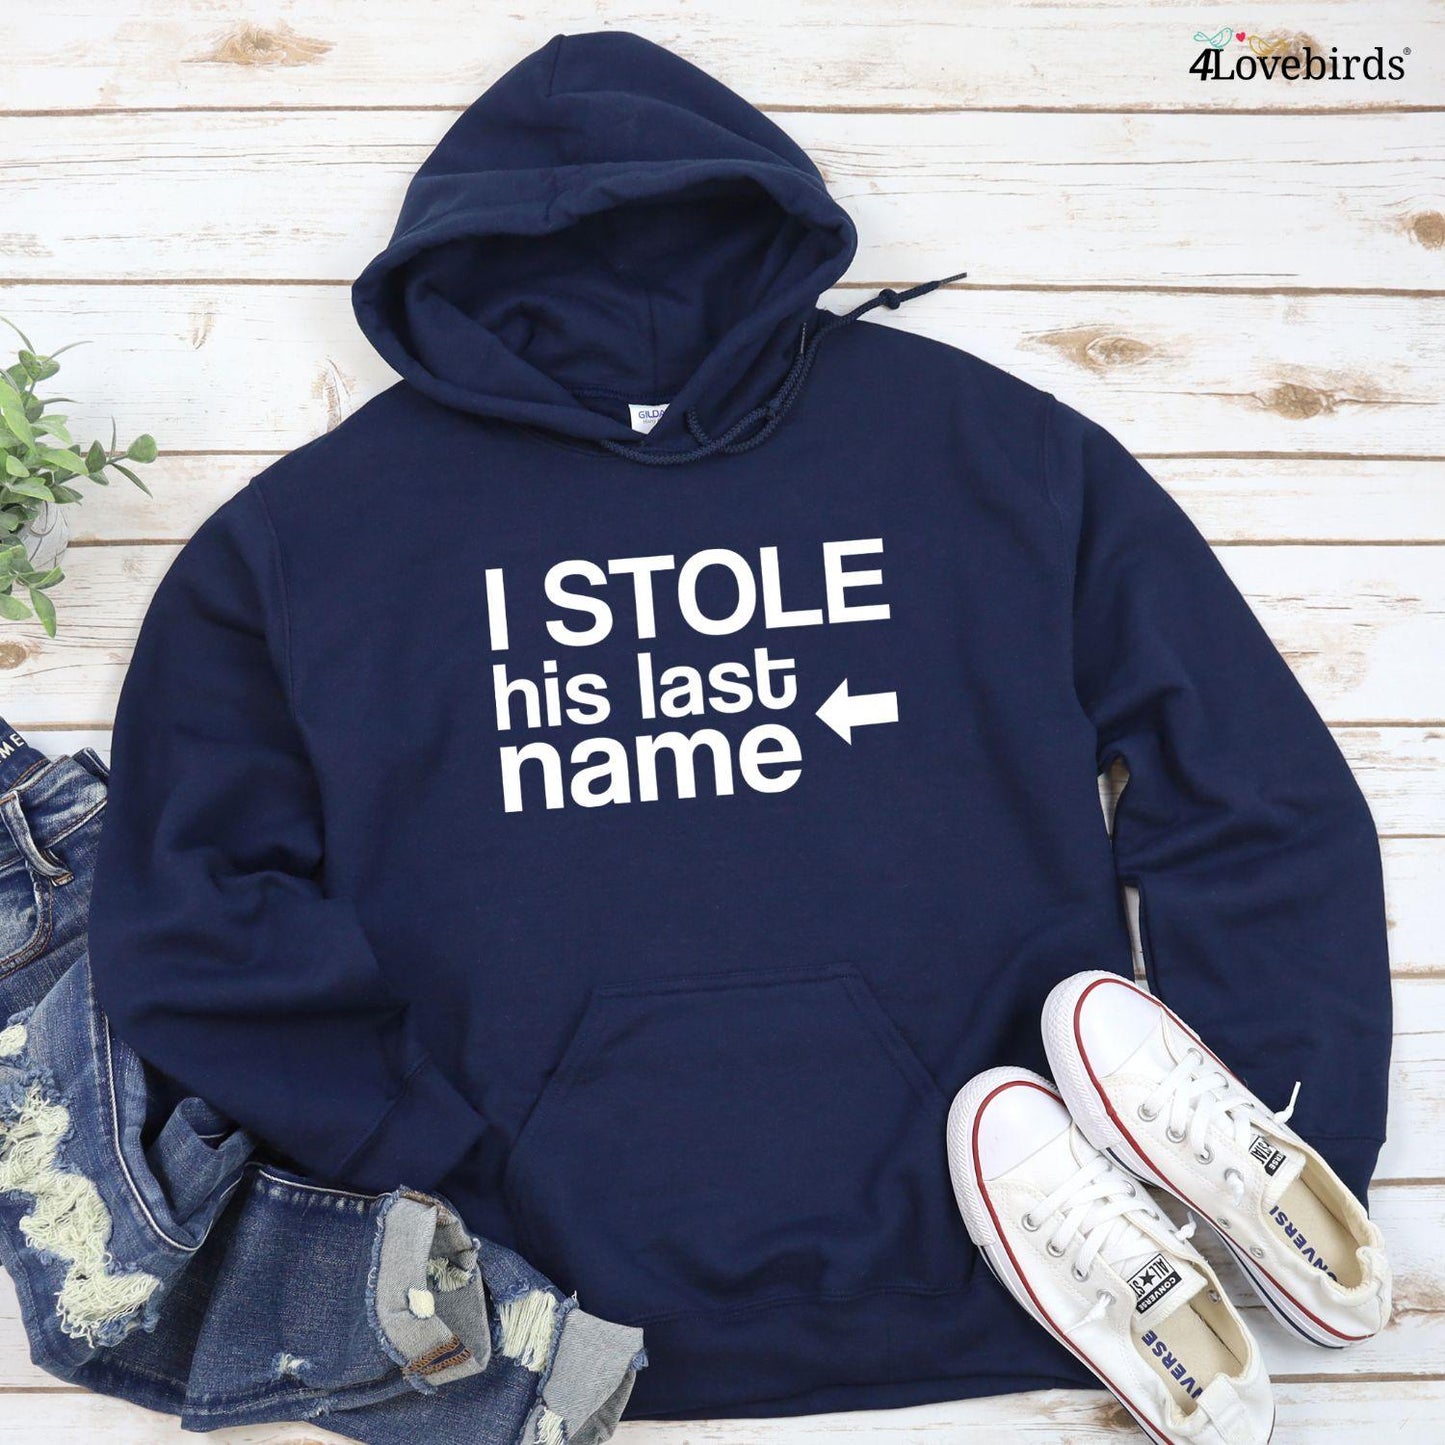 Matching Set: 'I Stole Her Heart' & 'I Stole His Last Name' - Adorable Couples' Gift Idea! - 4Lovebirds